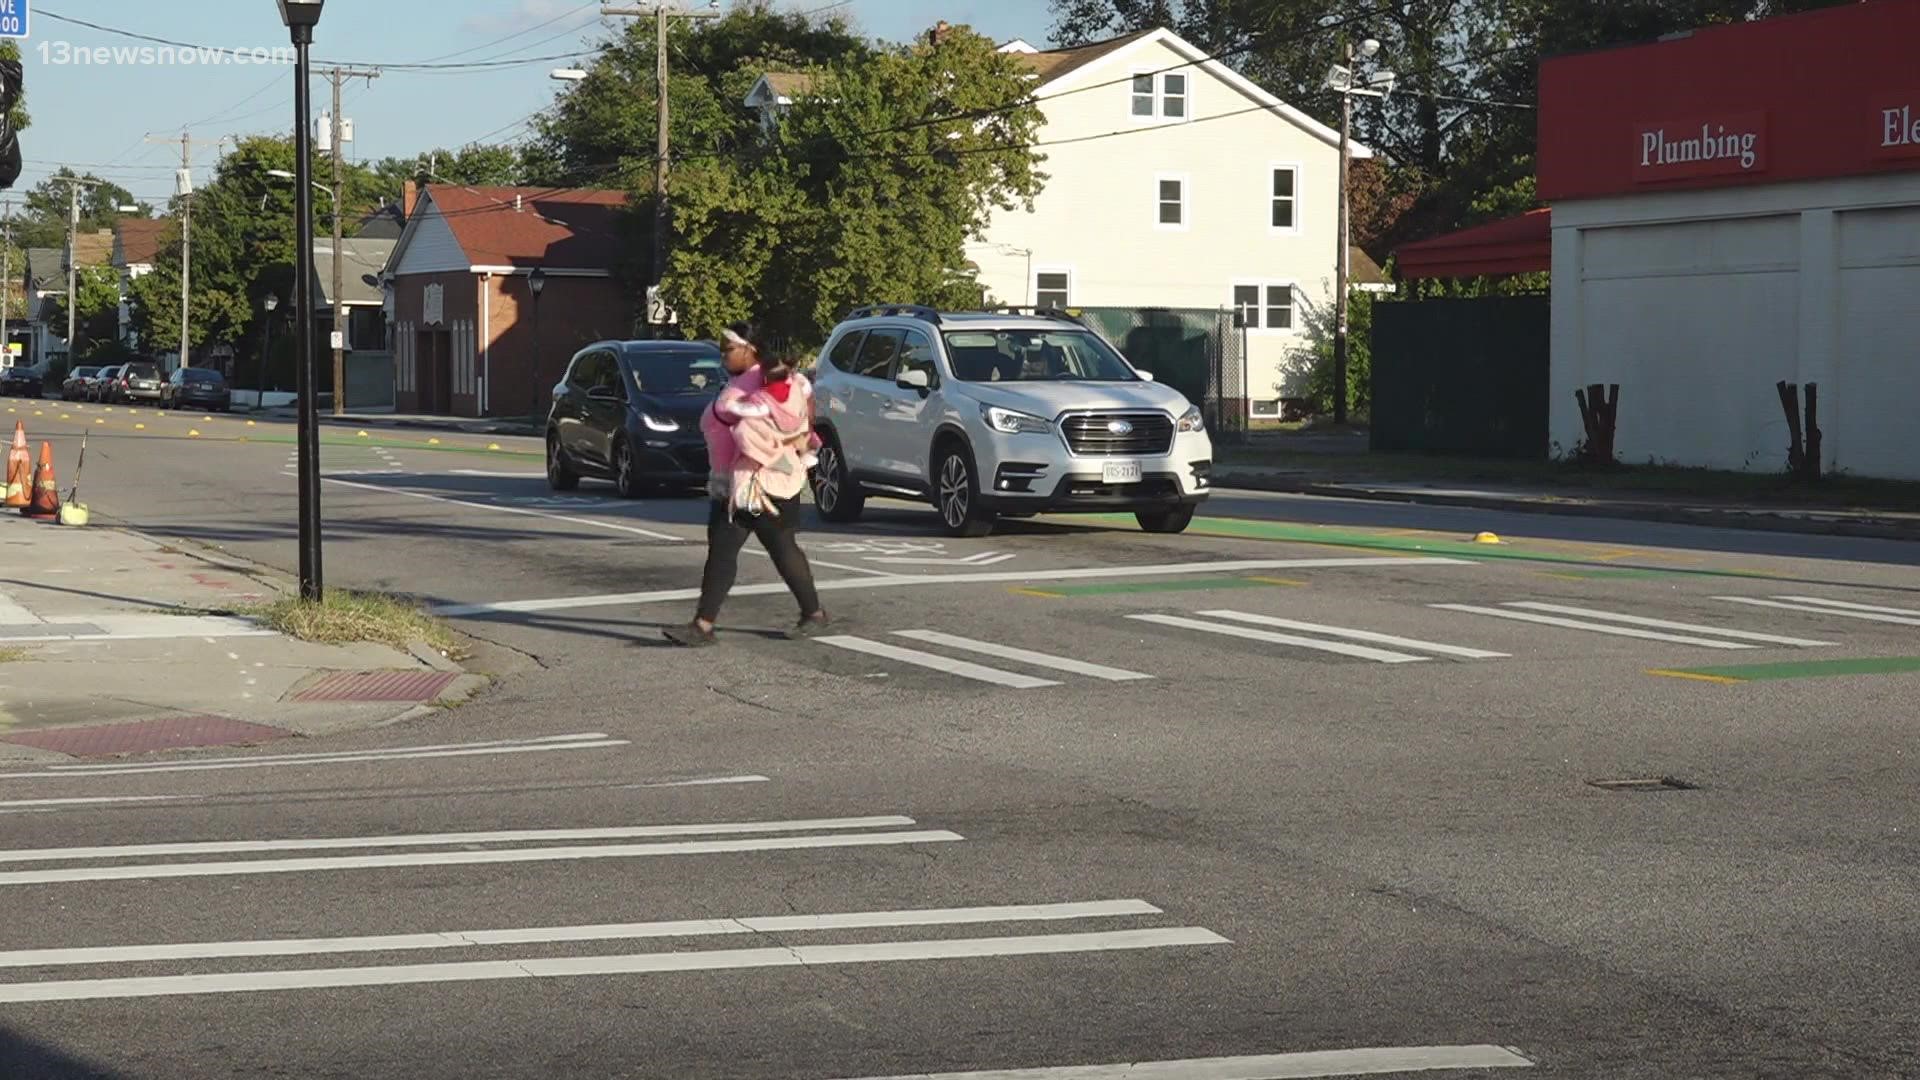 Data shows Norfolk has had 12 pedestrian fatalities from January to October of this year.